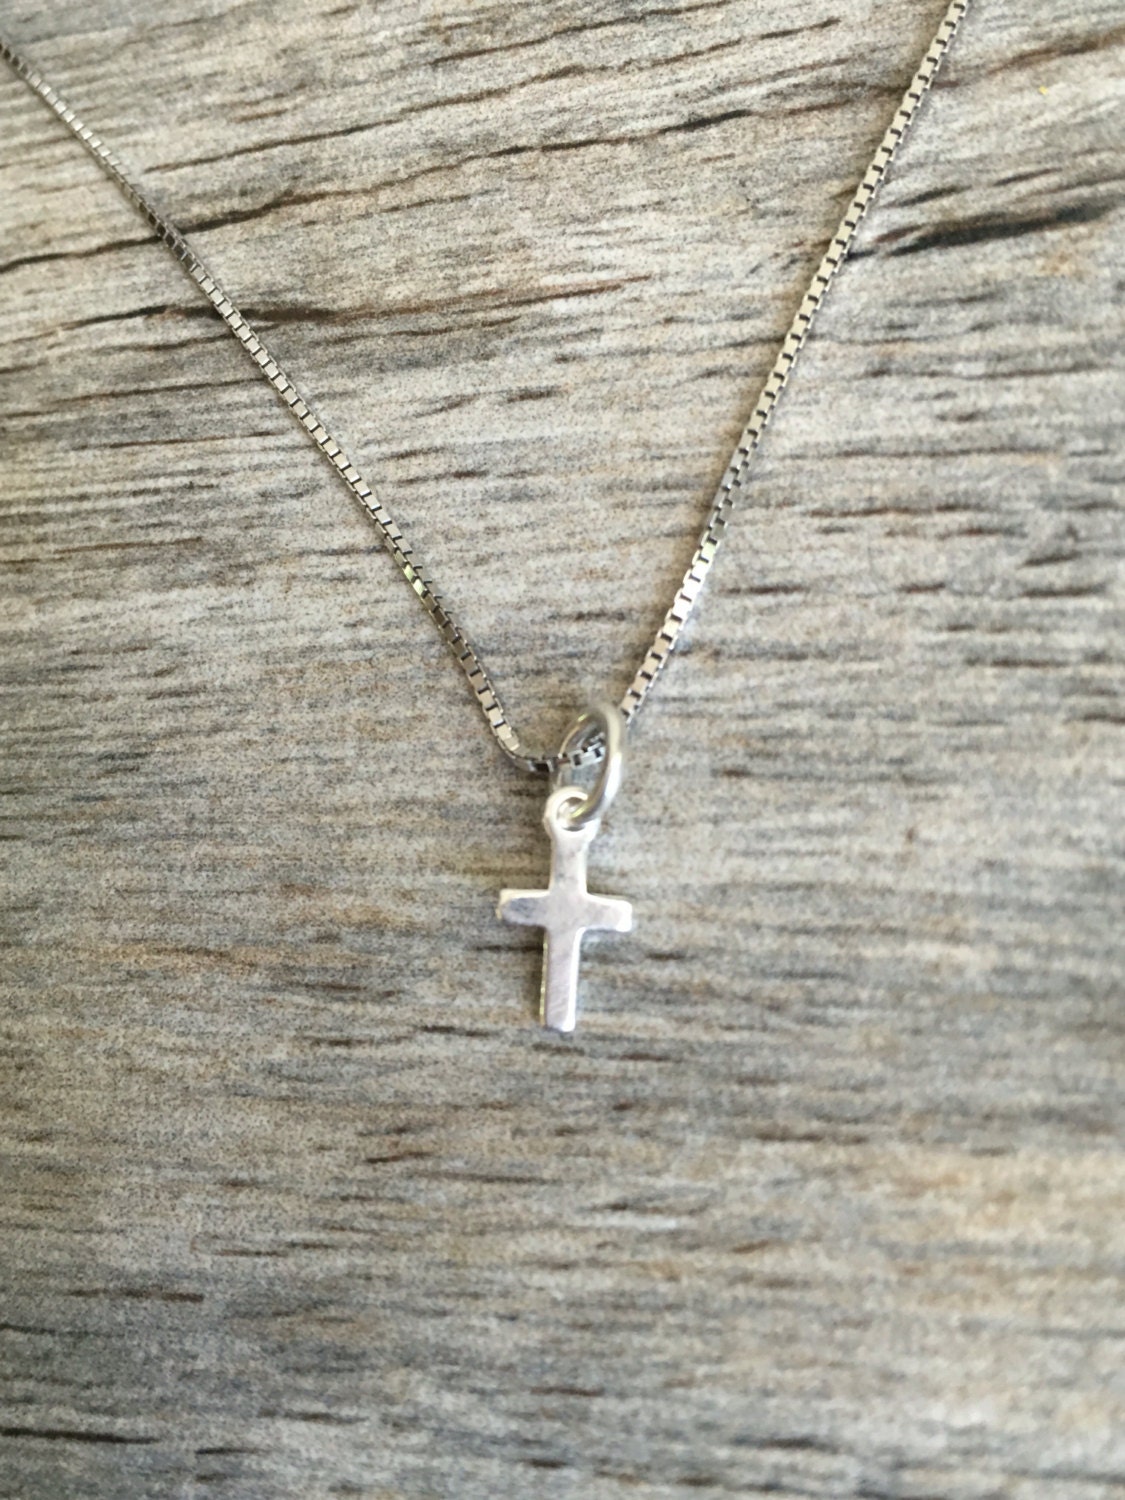 Dainty cross necklace small cross necklace sterling silver | Etsy